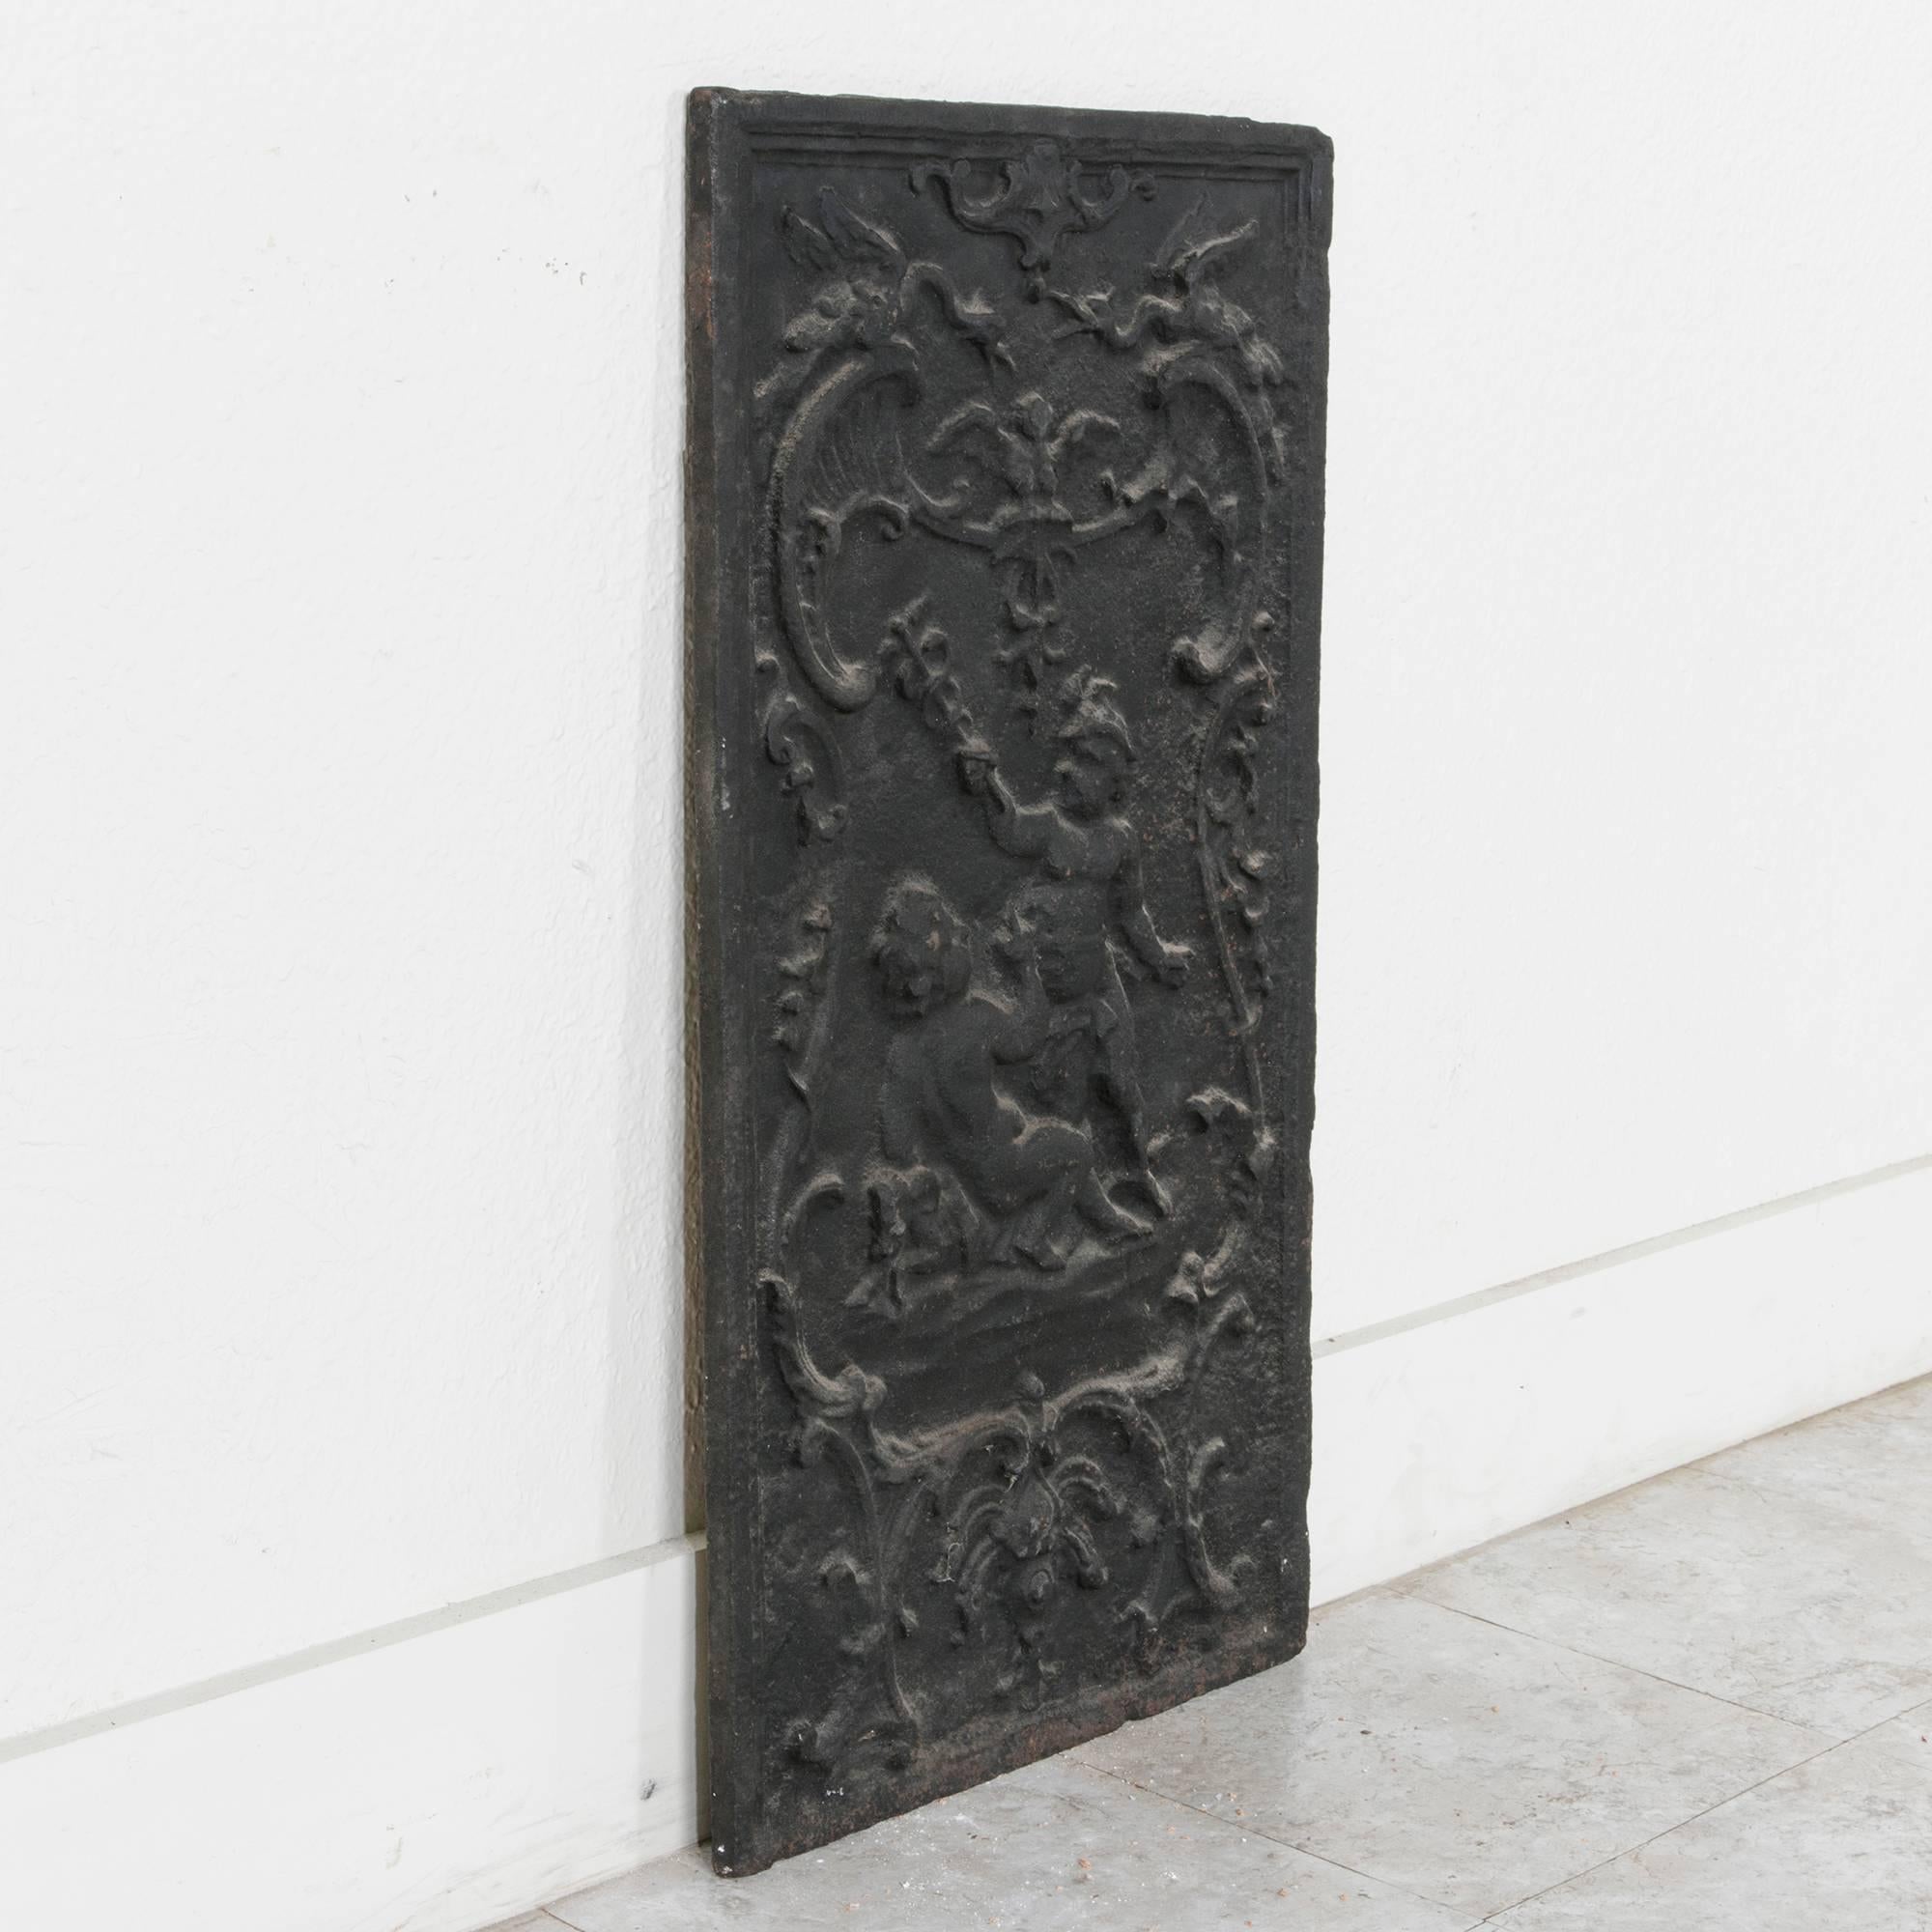 This 19th century iron fireplace back channels a Classic romantic motif featuring putti with scrolling filigree in asymmetrical decoration. One putti carries a staff with two serpents intertwined. This depiction of the caduceus is a reference to the